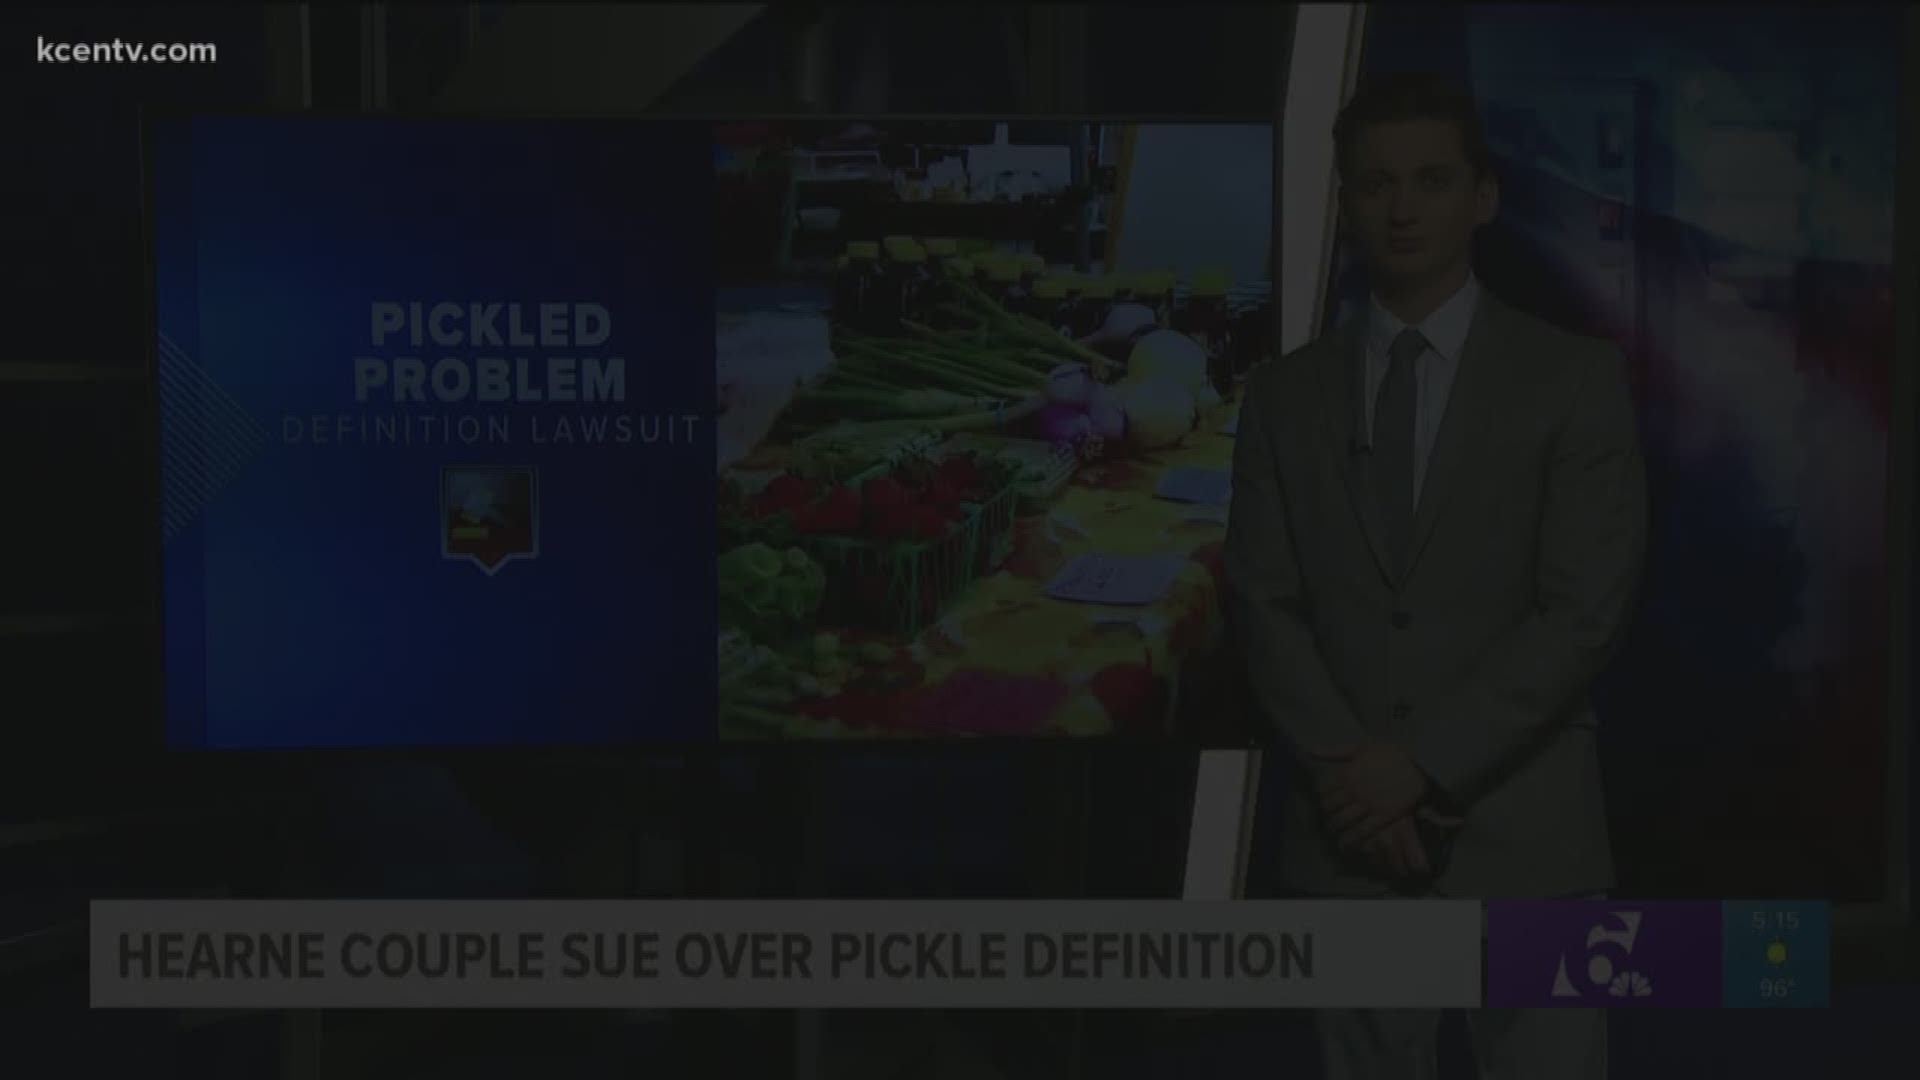 Texas couple sues over pickles